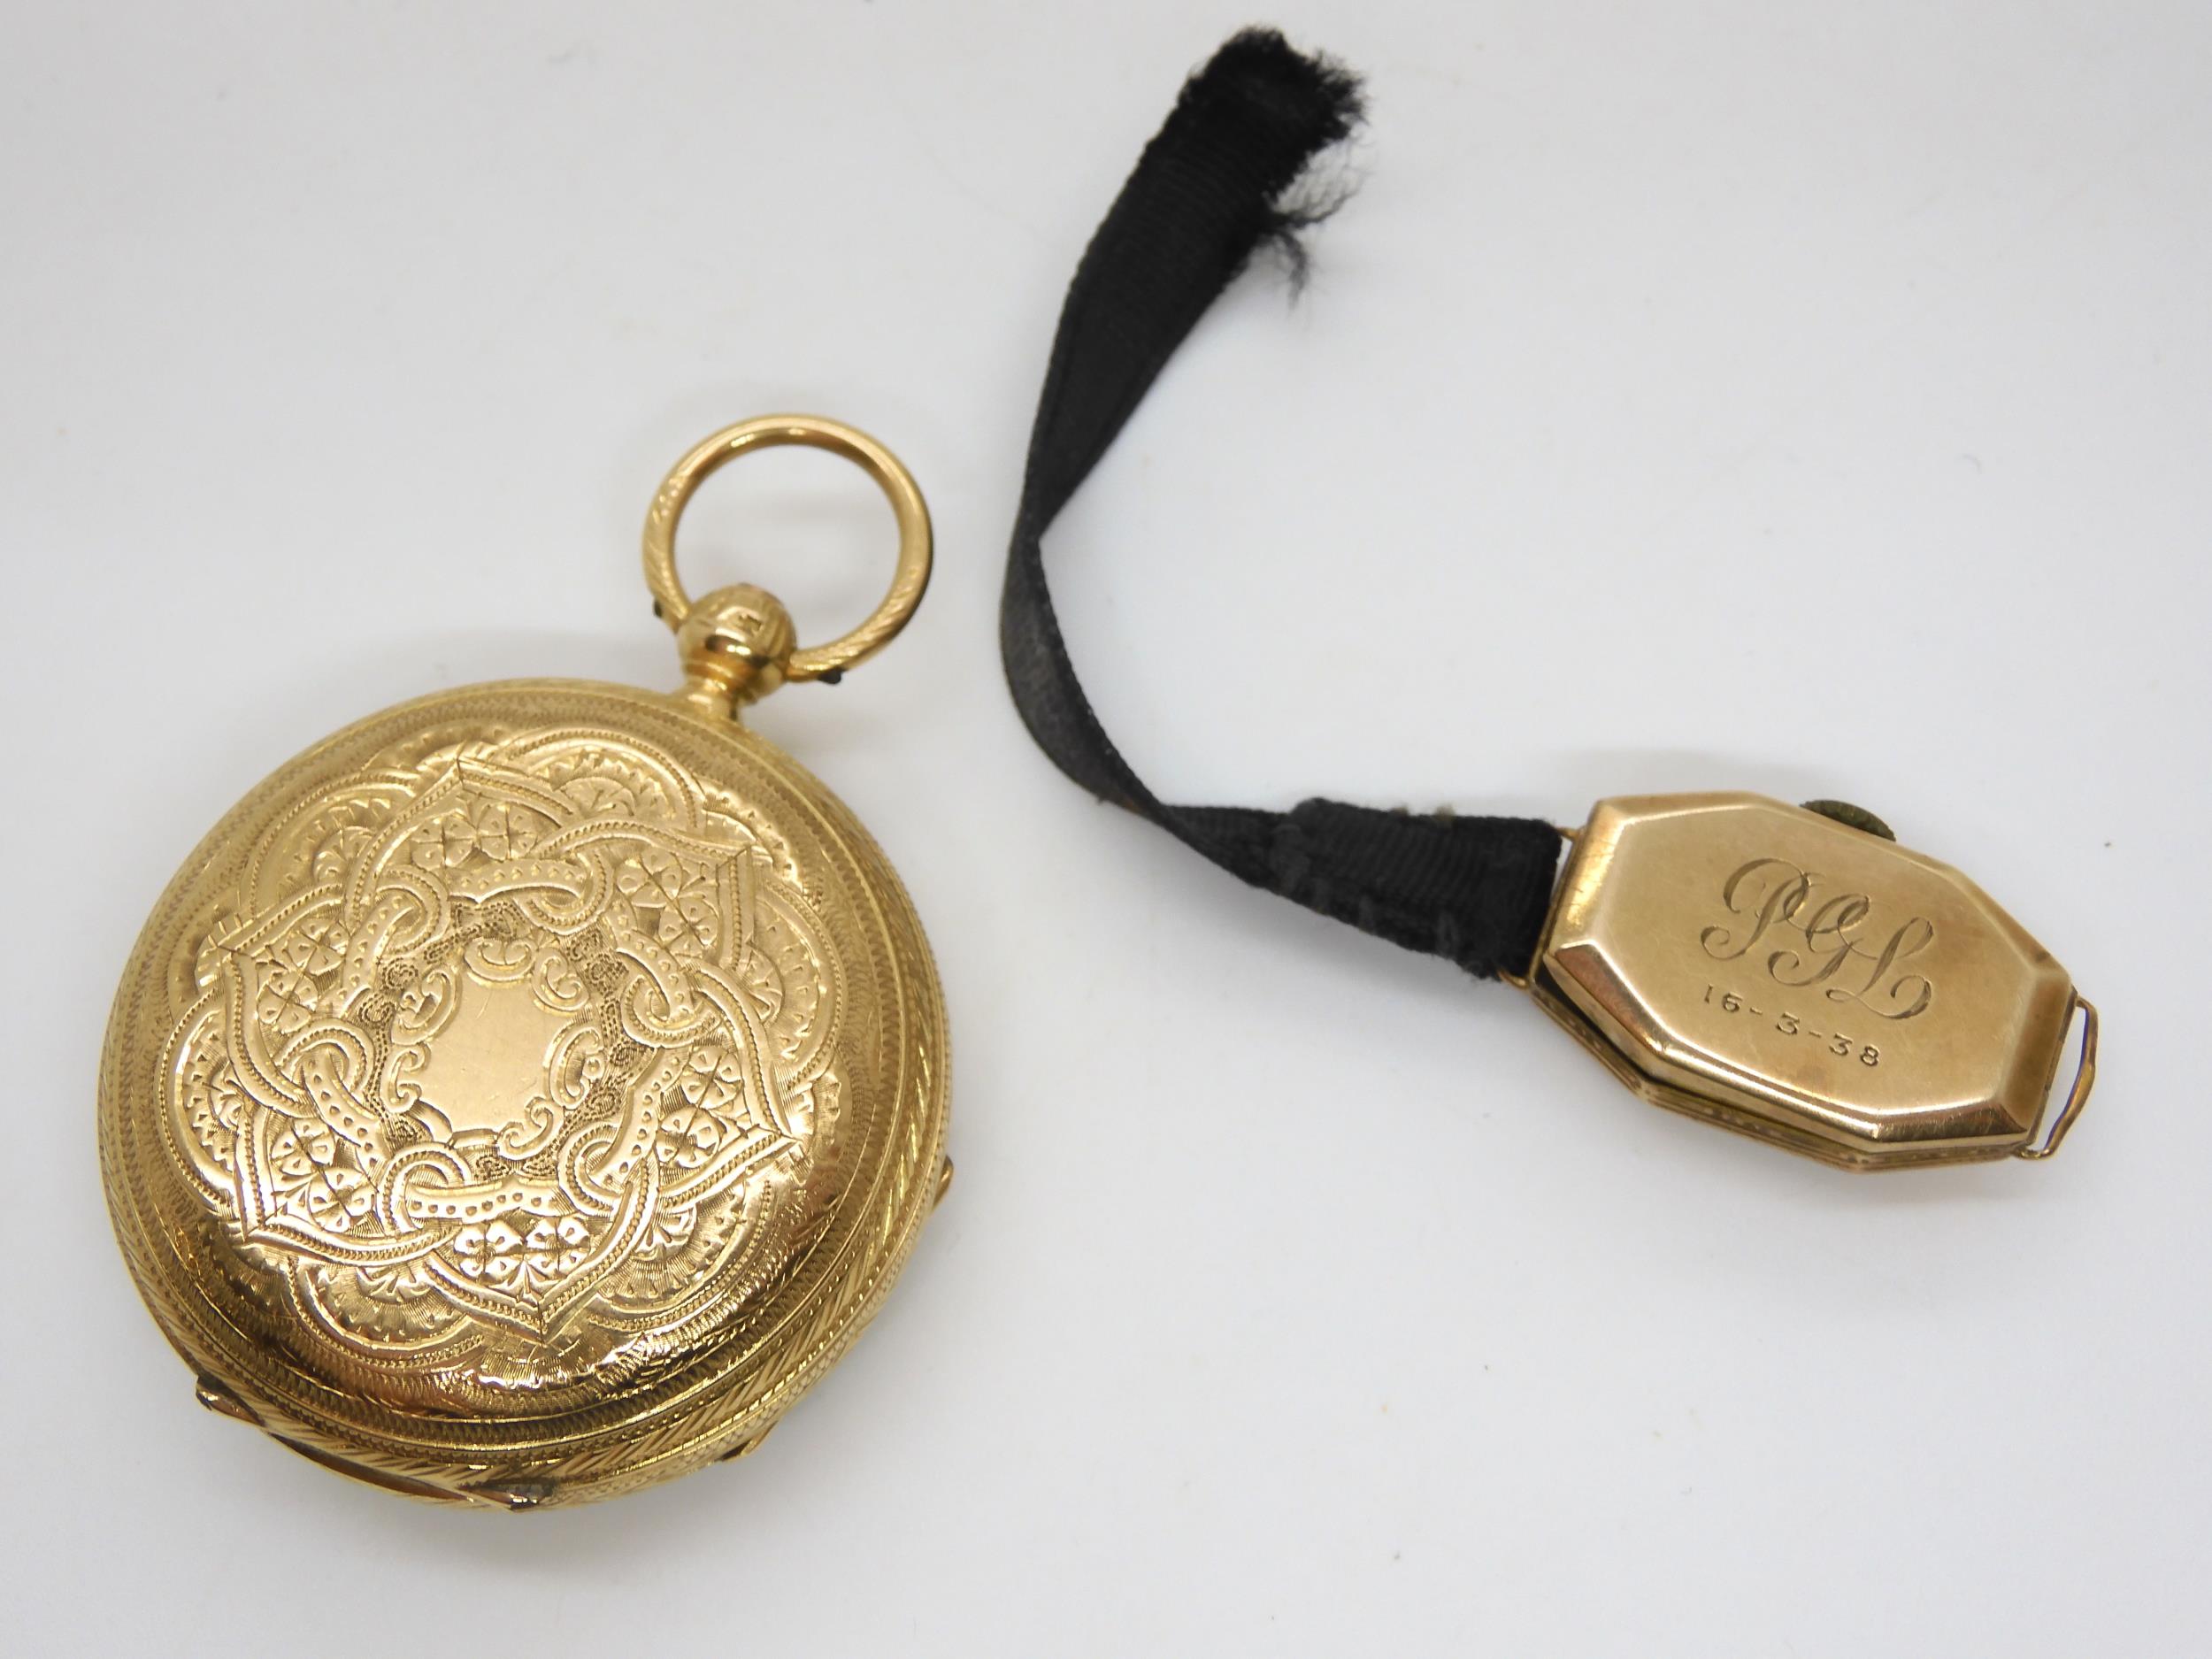 An 18ct gold open face fob watch with decorative gold dial, weight including mechanism 50.1gms, - Image 2 of 6